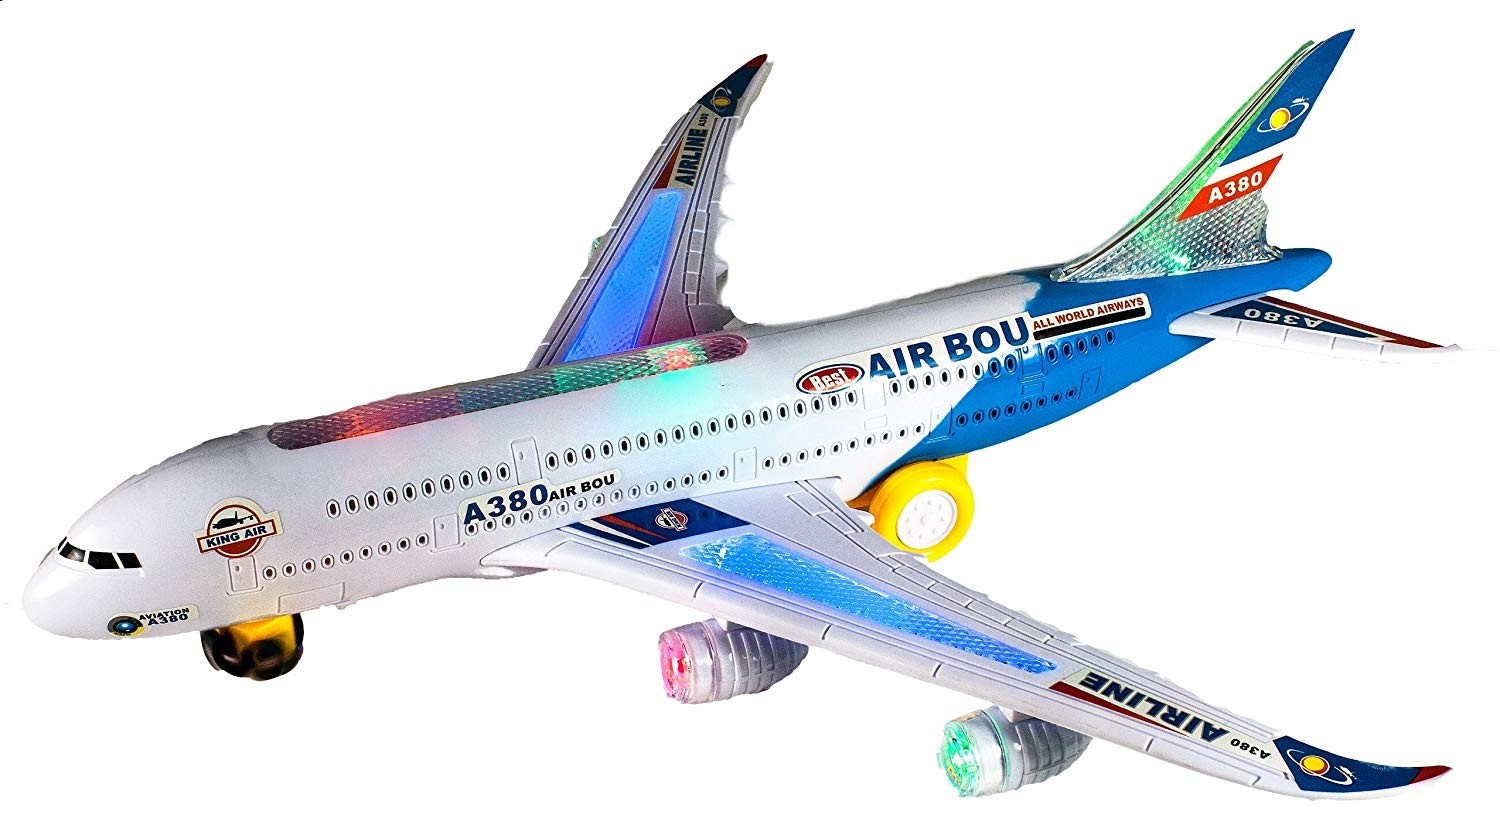 Airbus Plane With Flashing Lights and Sounds (Blue)